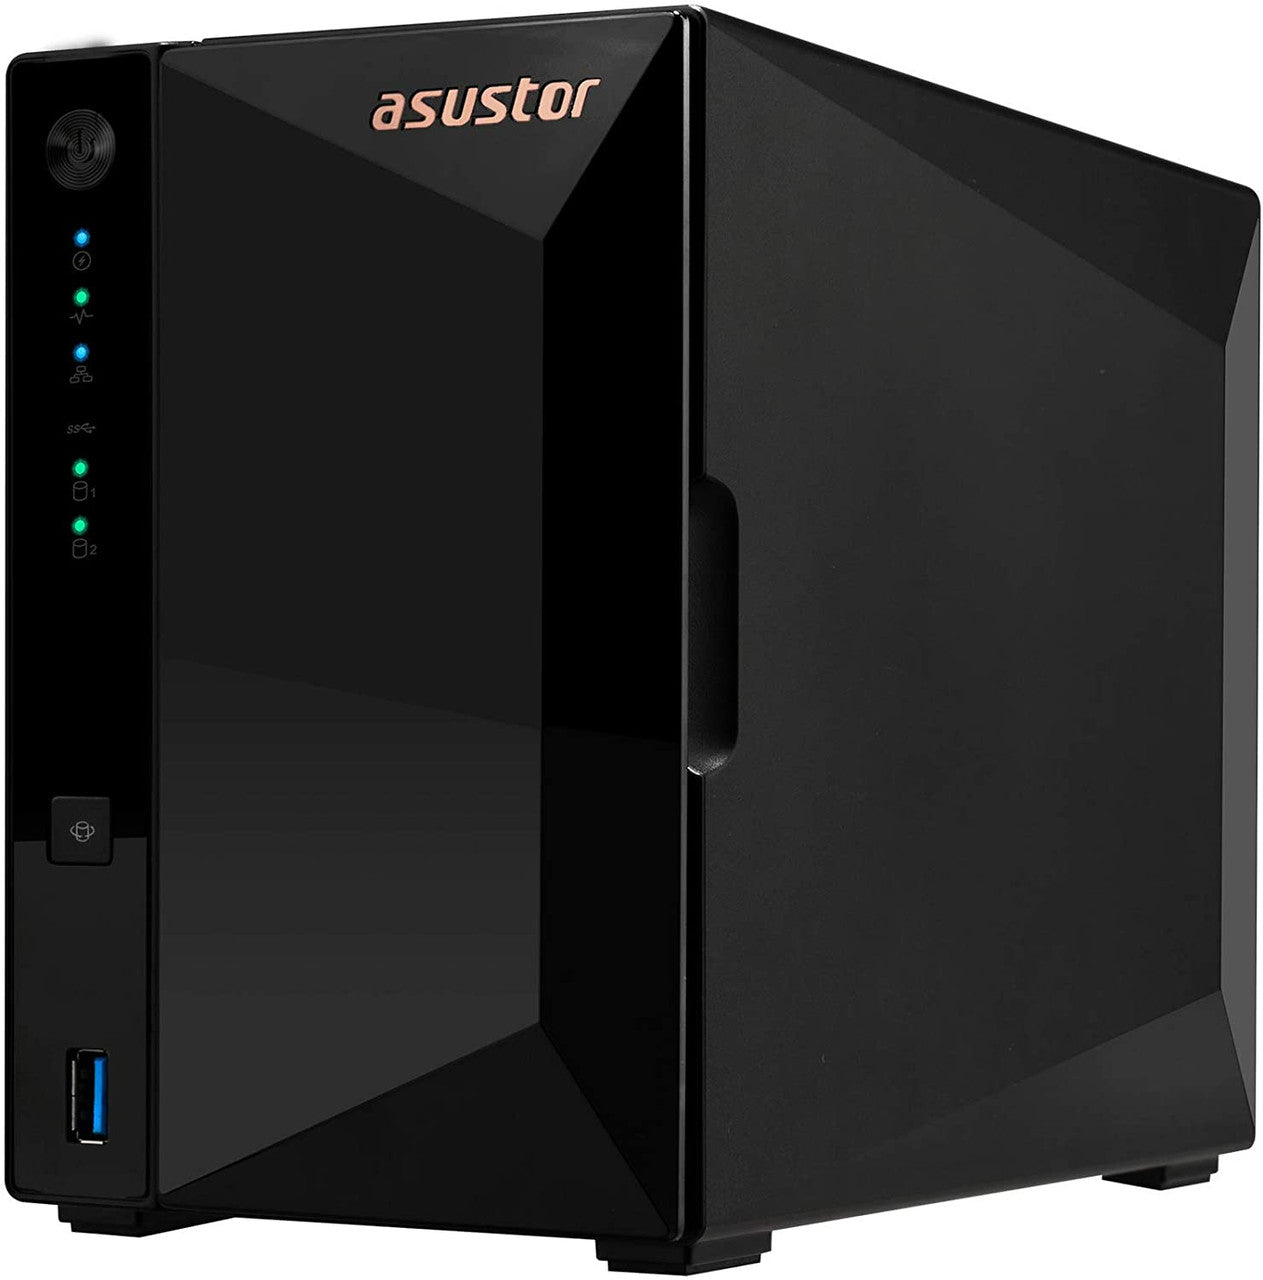 Asustor AS3302T 2-Bay Drivestor 2 PRO NAS with 2GB RAM and 4TB (2x2TB) Western Digital RED PRO Drives Fully Assembled and Tested